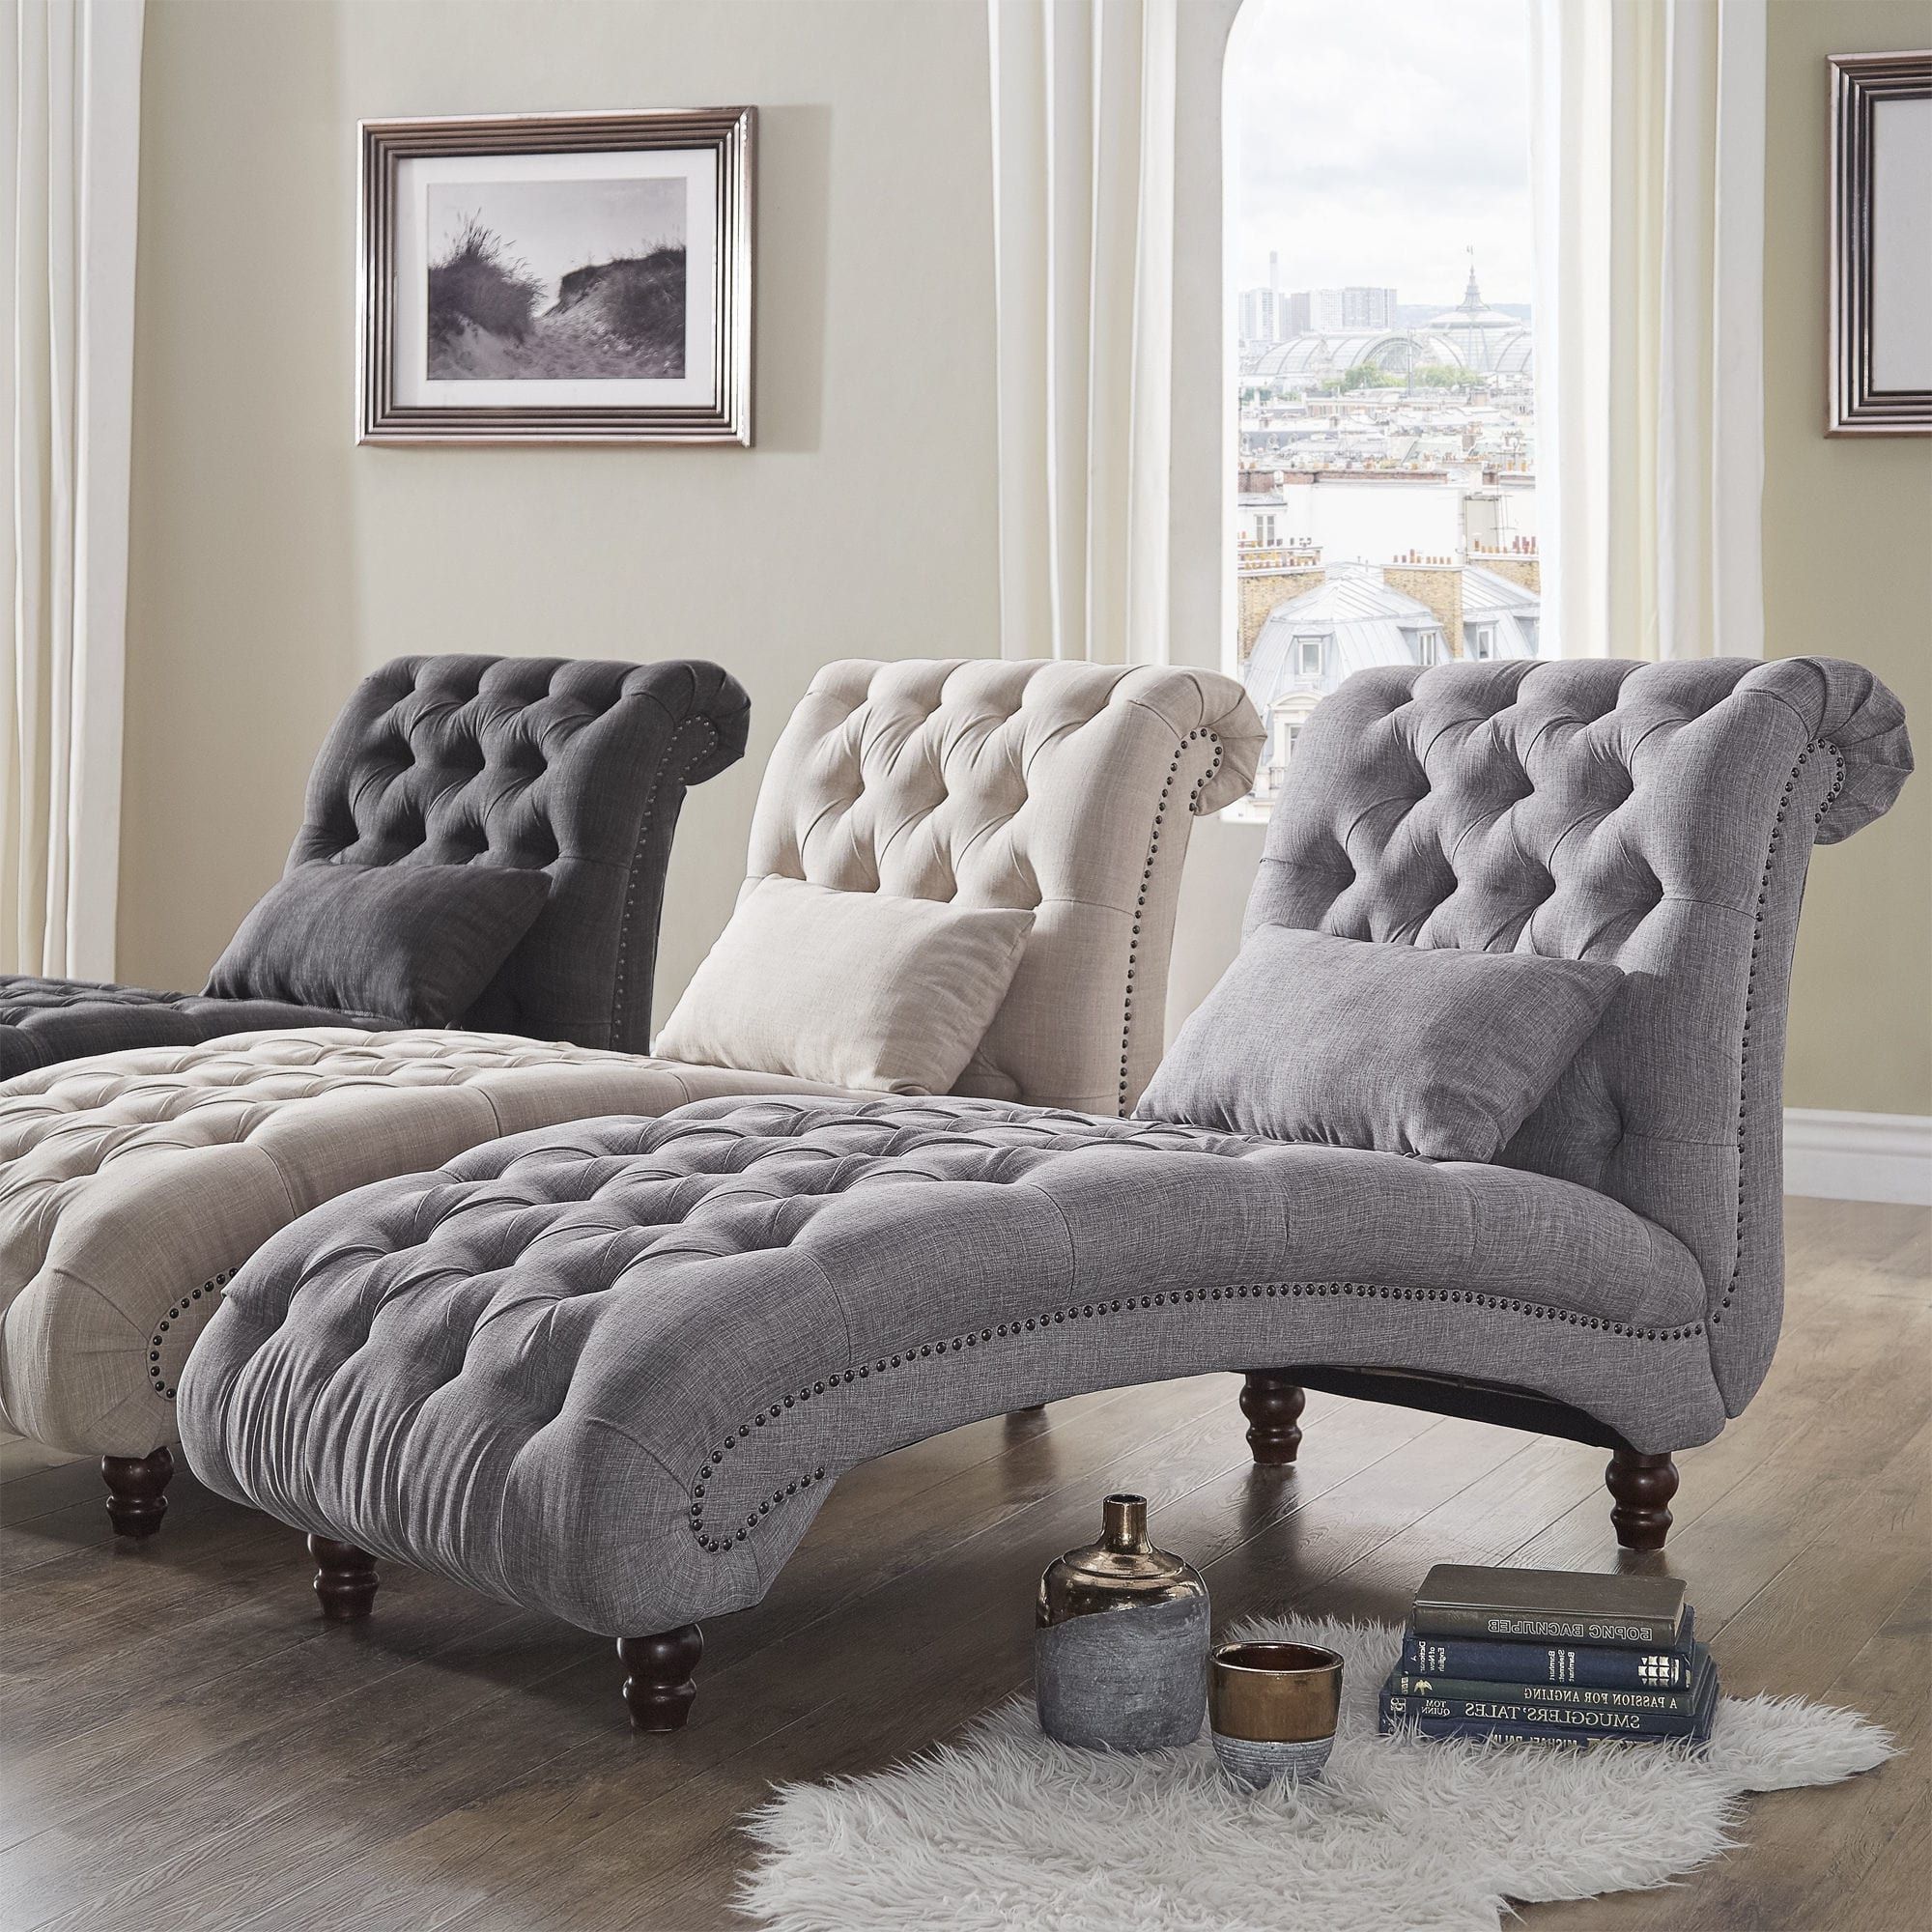 Favorite Knightsbridge Tufted Oversized Chaise Loungeinspire Q Artisan Within Overstock Chaise Lounges (View 1 of 15)